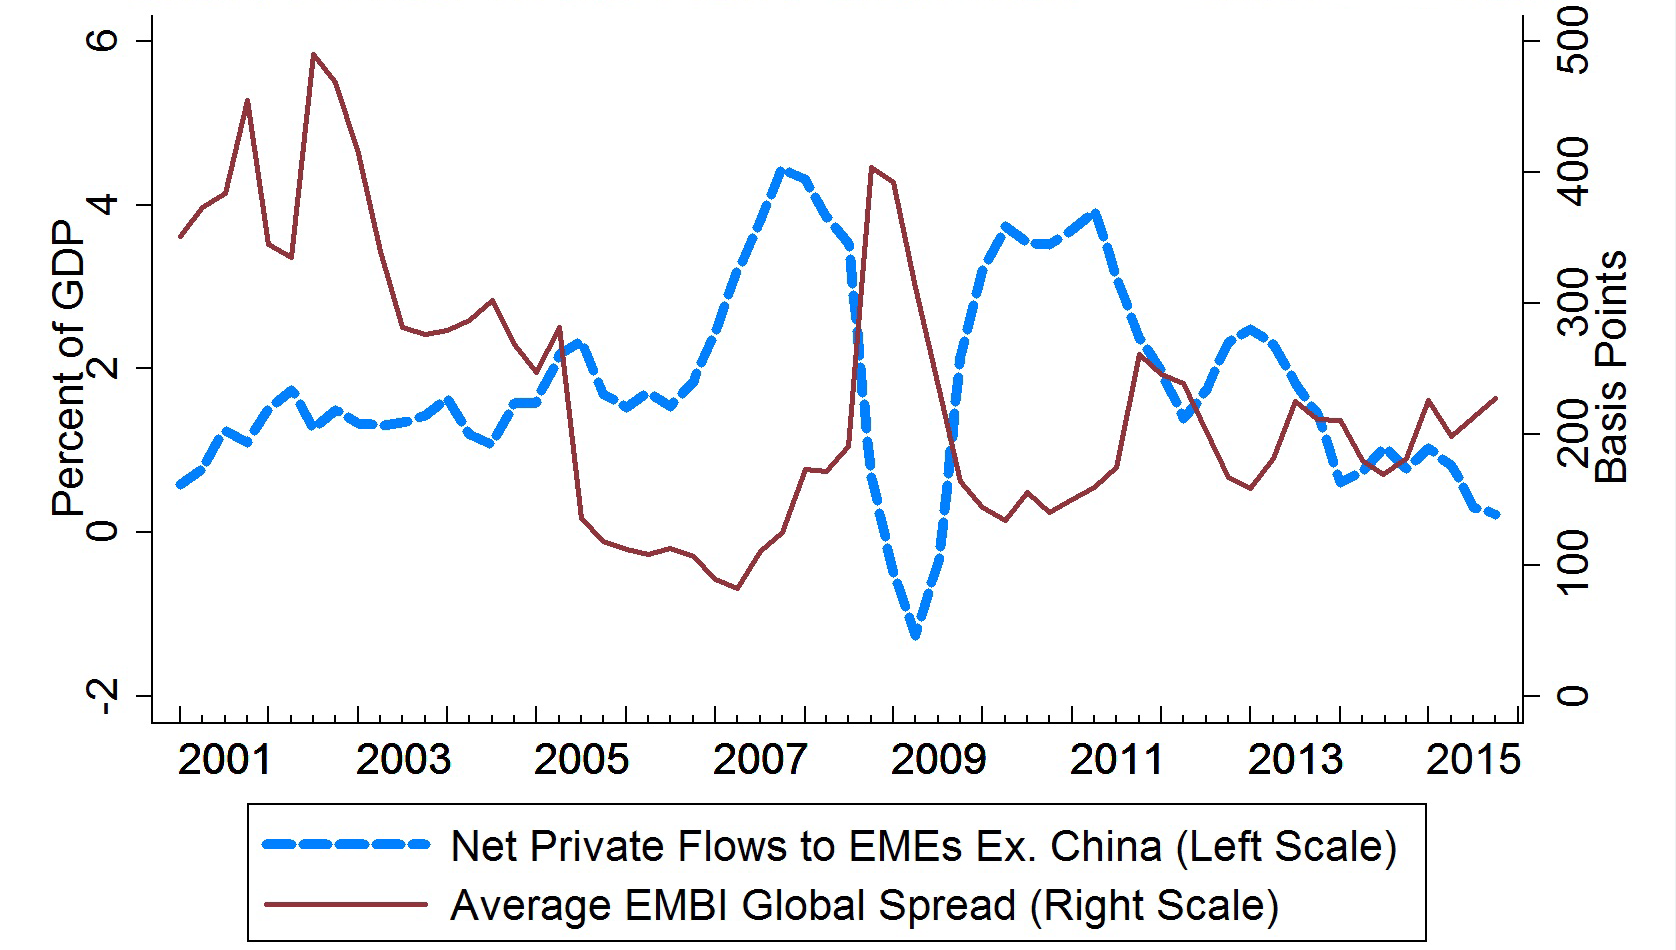 Chart 8: Net Private Flows and Average EMBIG Spread. See accessible link for data.